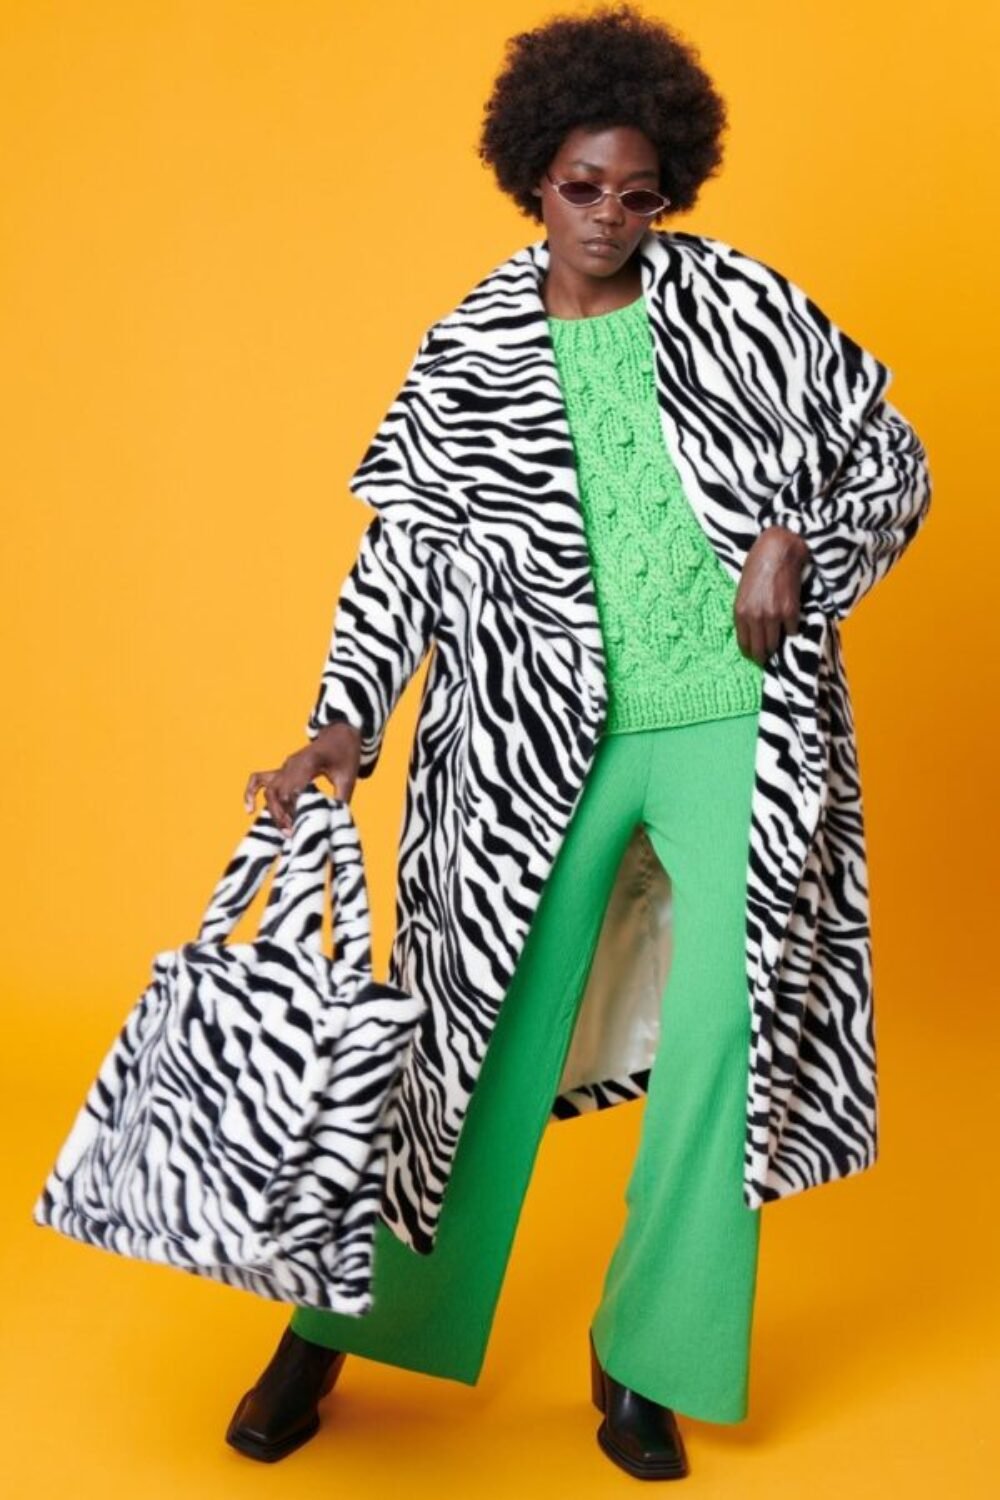 Shop Lux Zebra Print Faux Fur Maxi Coat and women's luxury and designer clothes at www.lux-apparel.co.uk